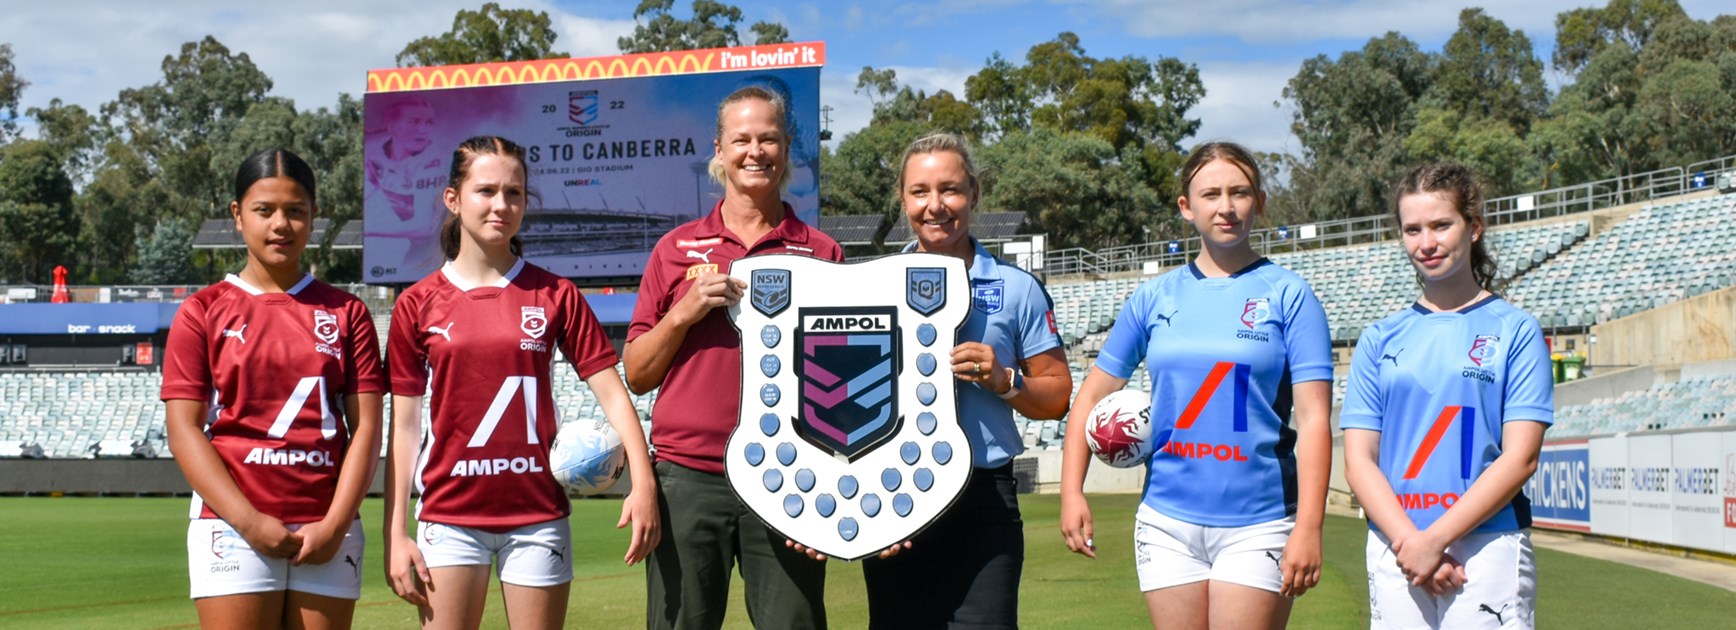 Canberra to host Women's Origin for first time